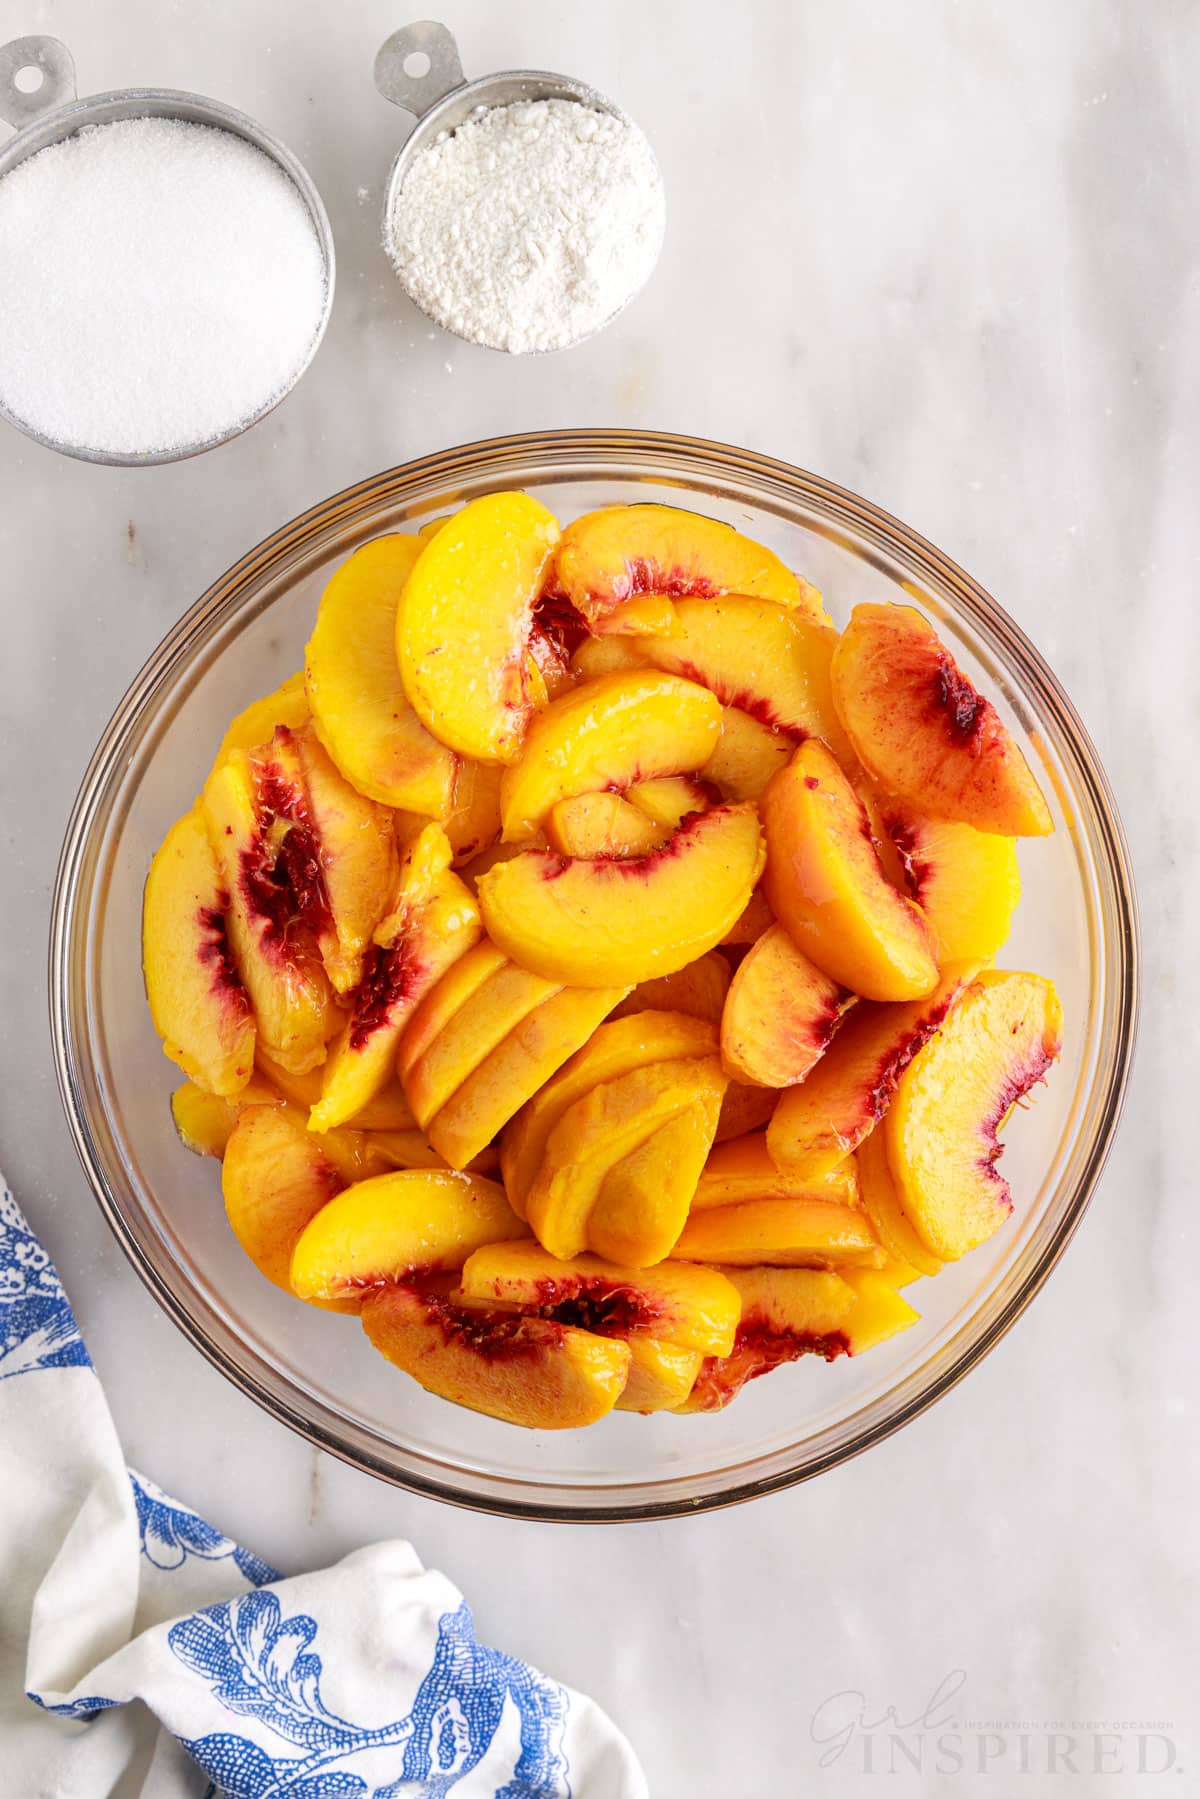 Sliced peaches in a glass mixing bowl next to a cup of sugar and flour.